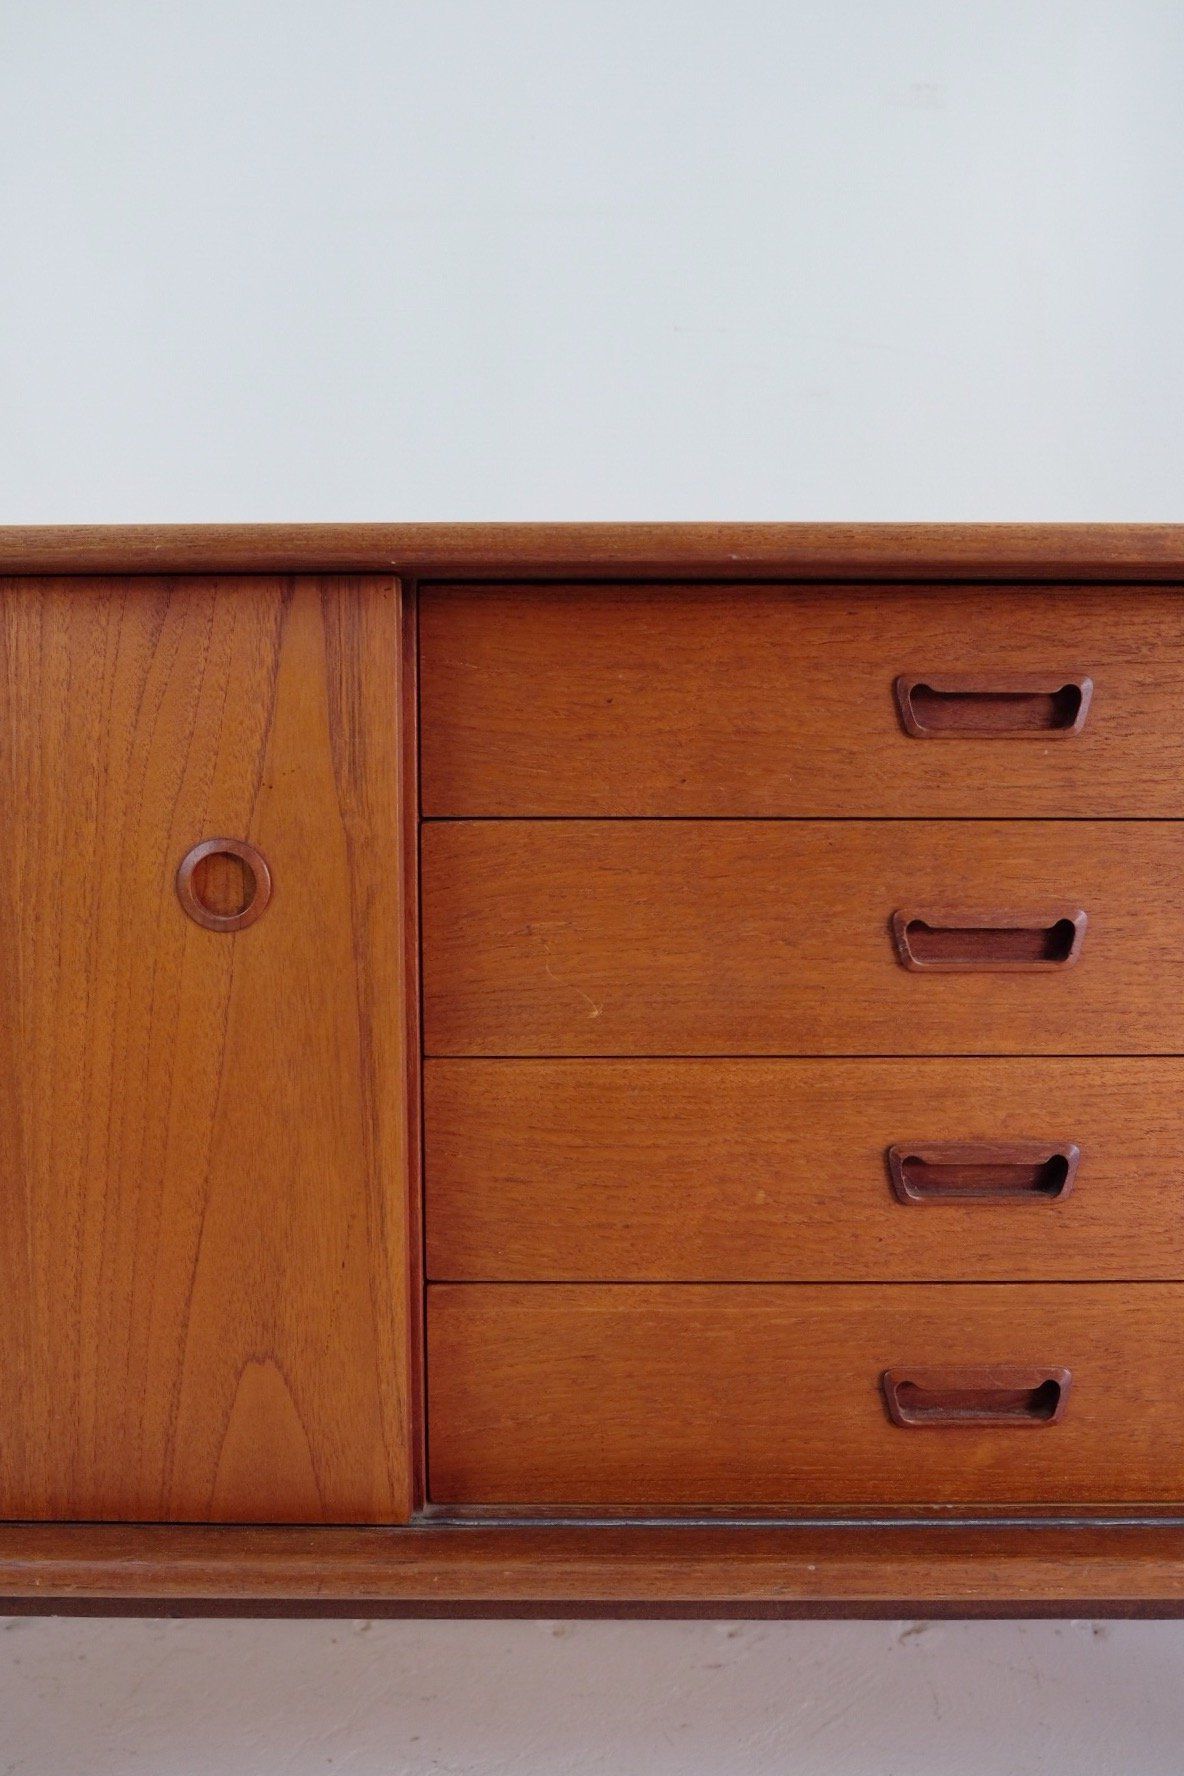 Danish Modern Teak Sideboard Credenza Buffet Cabinet In The Style Of Regarding Latest Solar Refinement Sideboards (View 13 of 20)